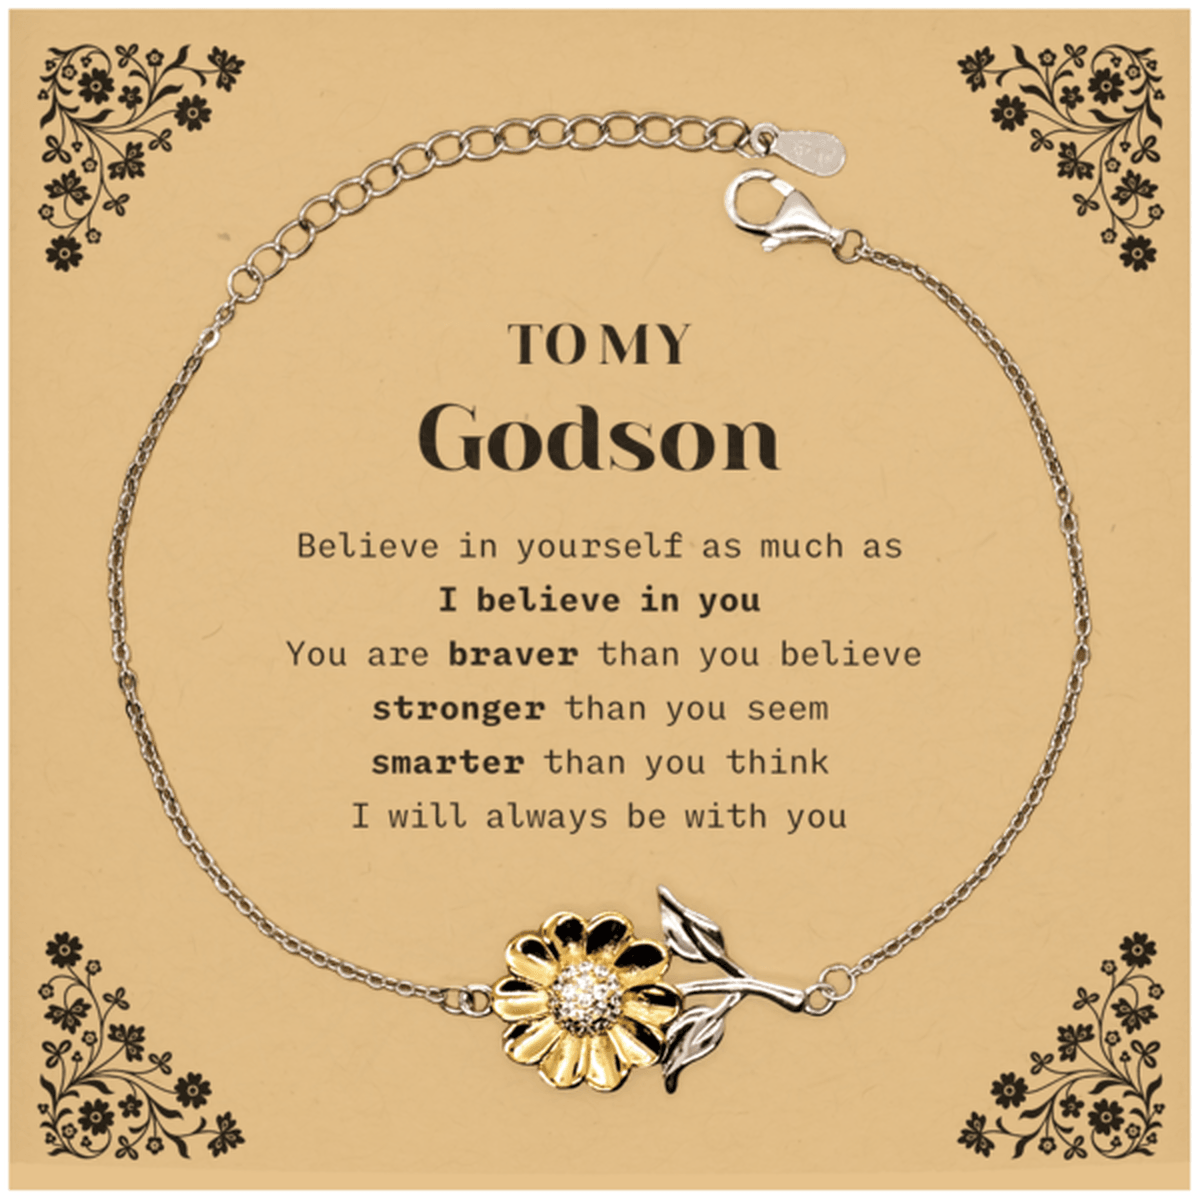 Godson Sunflower Bracelet Gifts, To My Godson You are braver than you believe, stronger than you seem, Inspirational Gifts For Godson Card, Birthday, Christmas Gifts For Godson Men Women